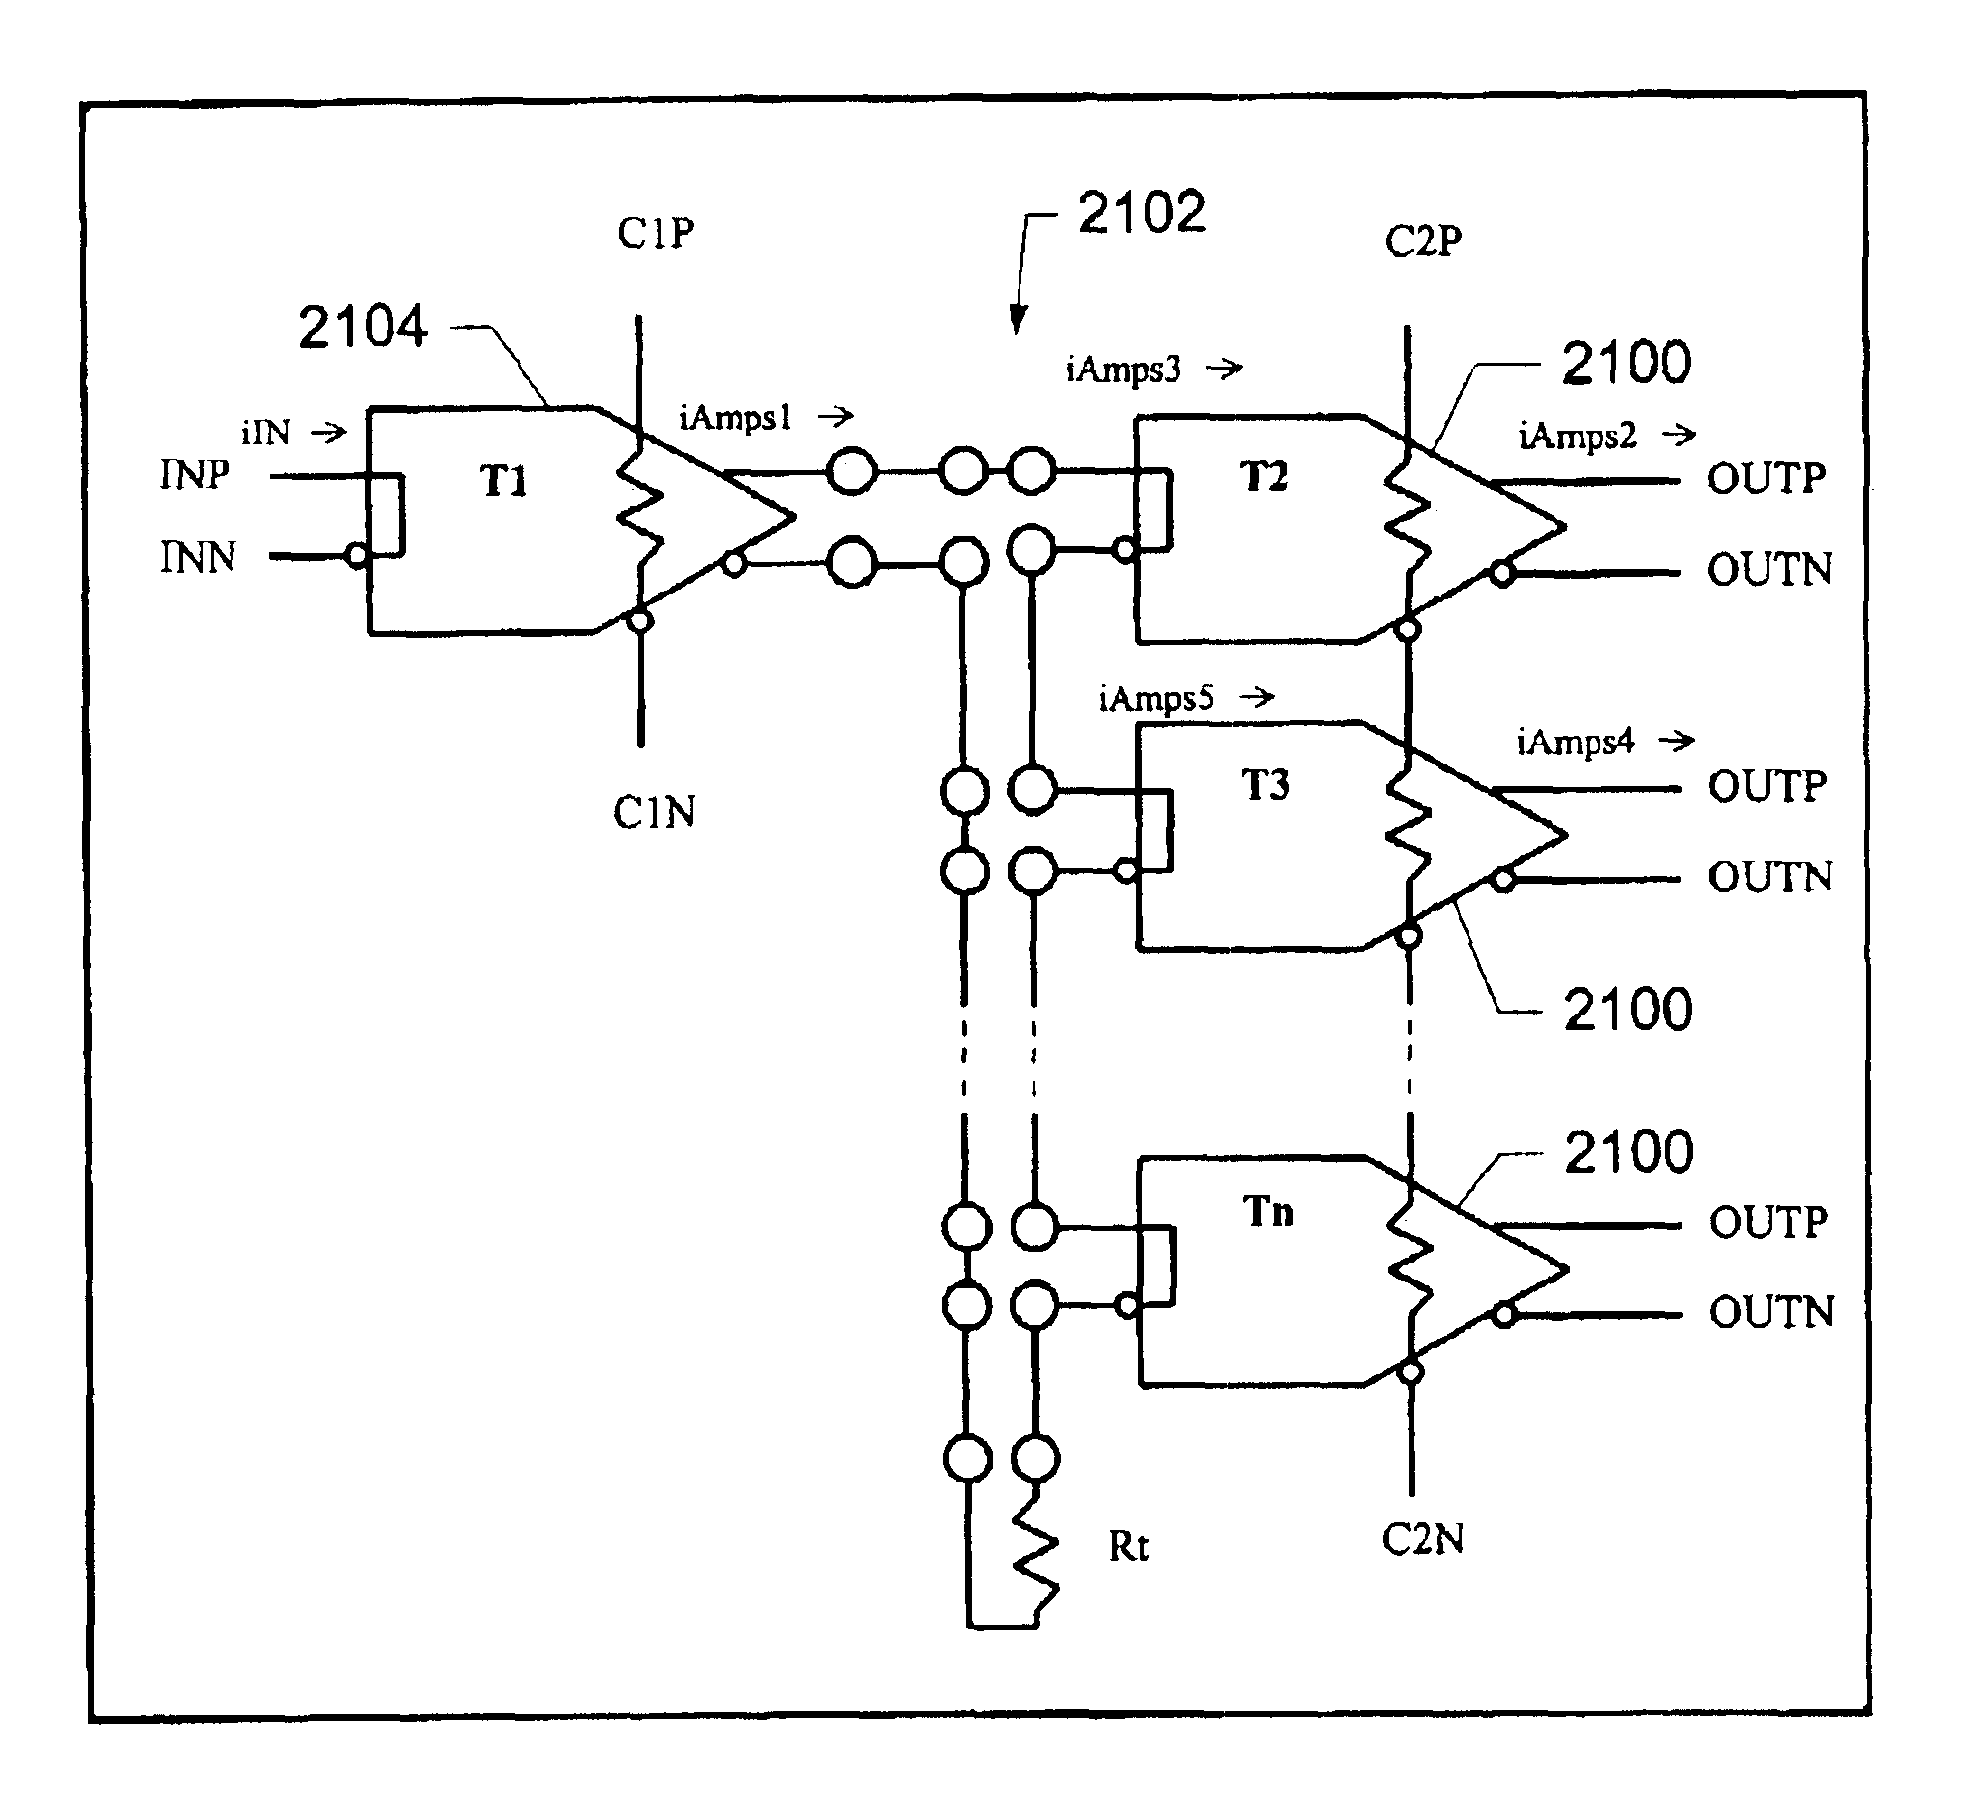 Transpinnor-based transmission line transceivers and applications